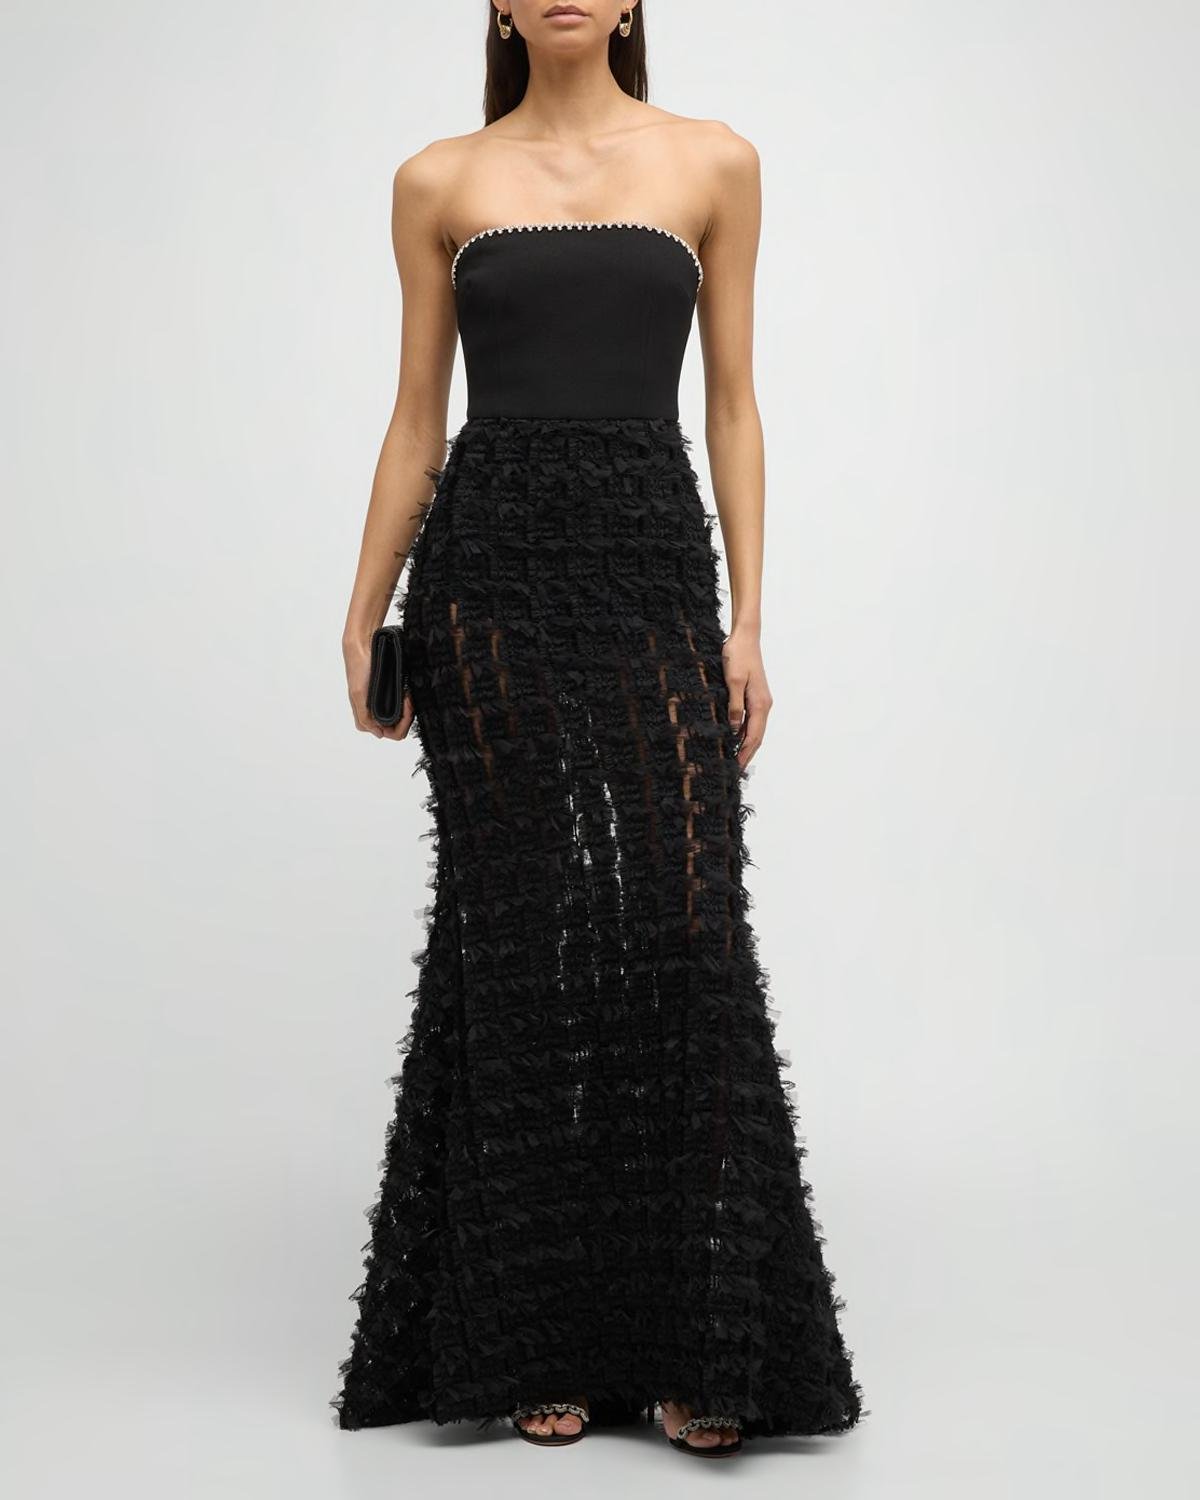 Cherie Amour Strapless Crystal-Embellished Gown by REBECCA VALLANCE